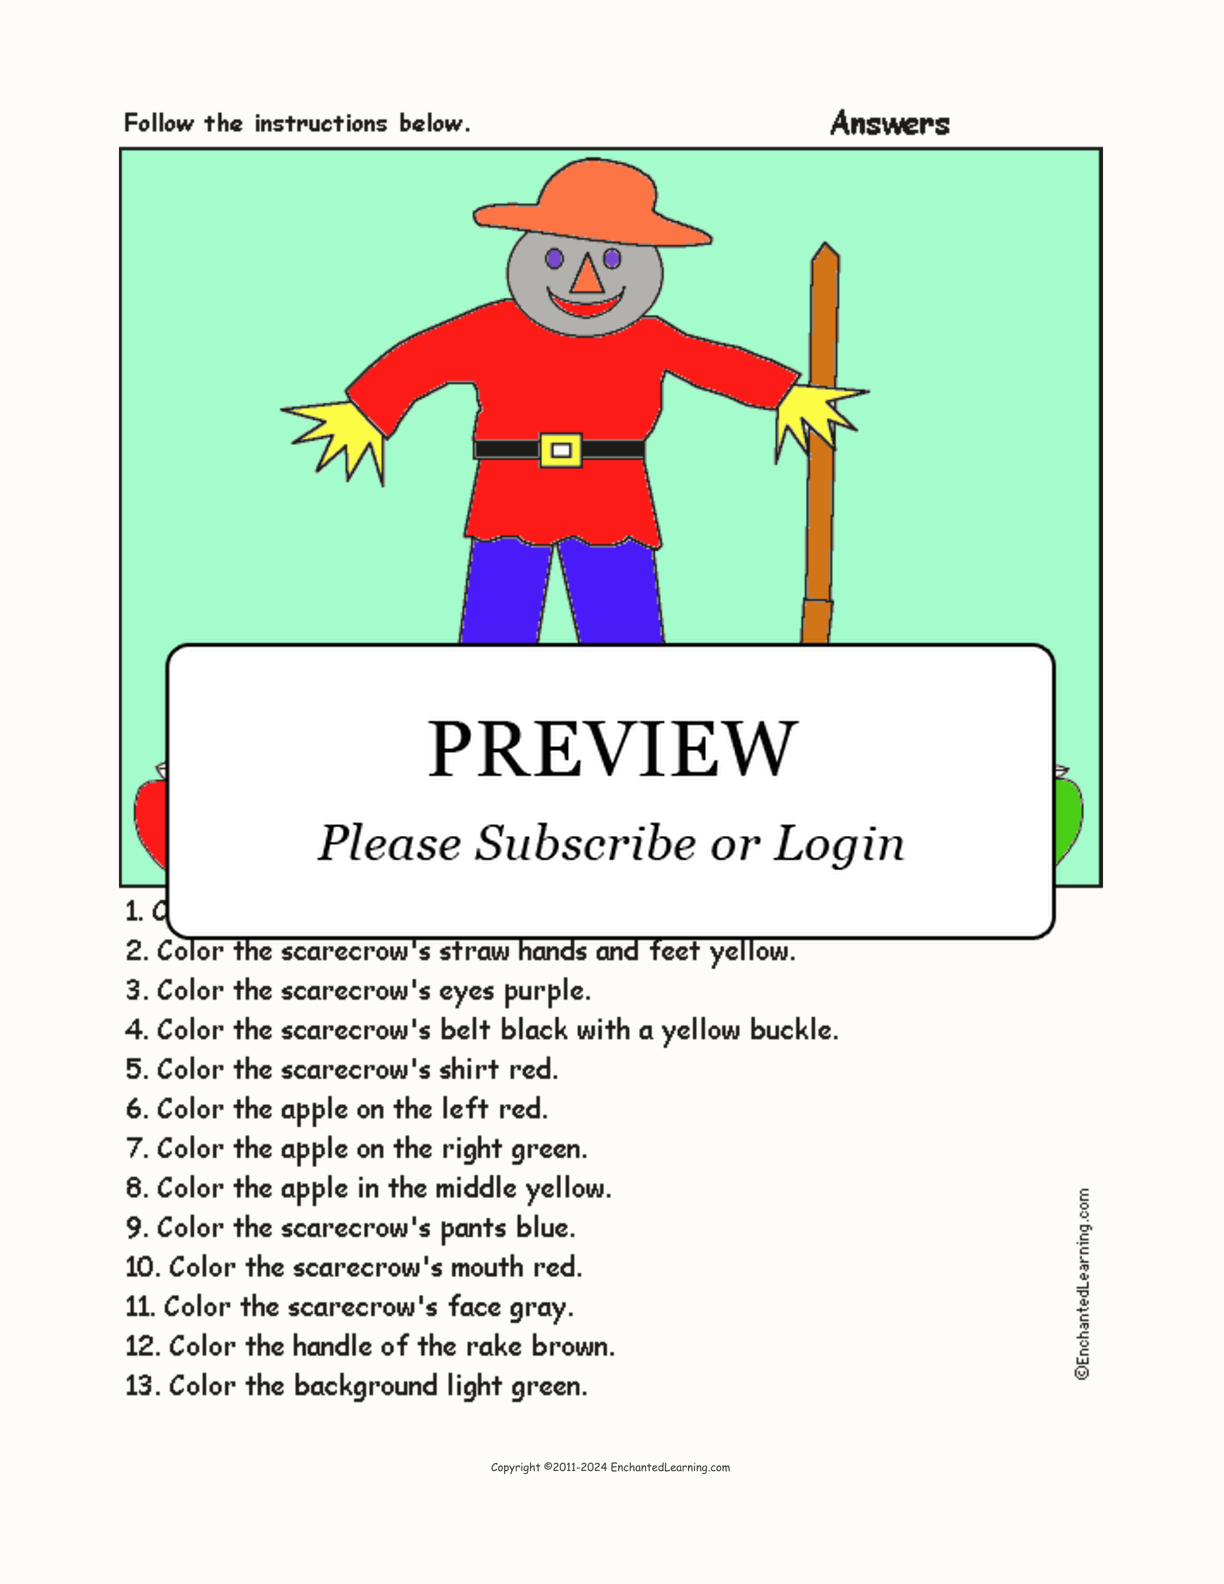 Scarecrow - Follow the Instructions interactive worksheet page 2